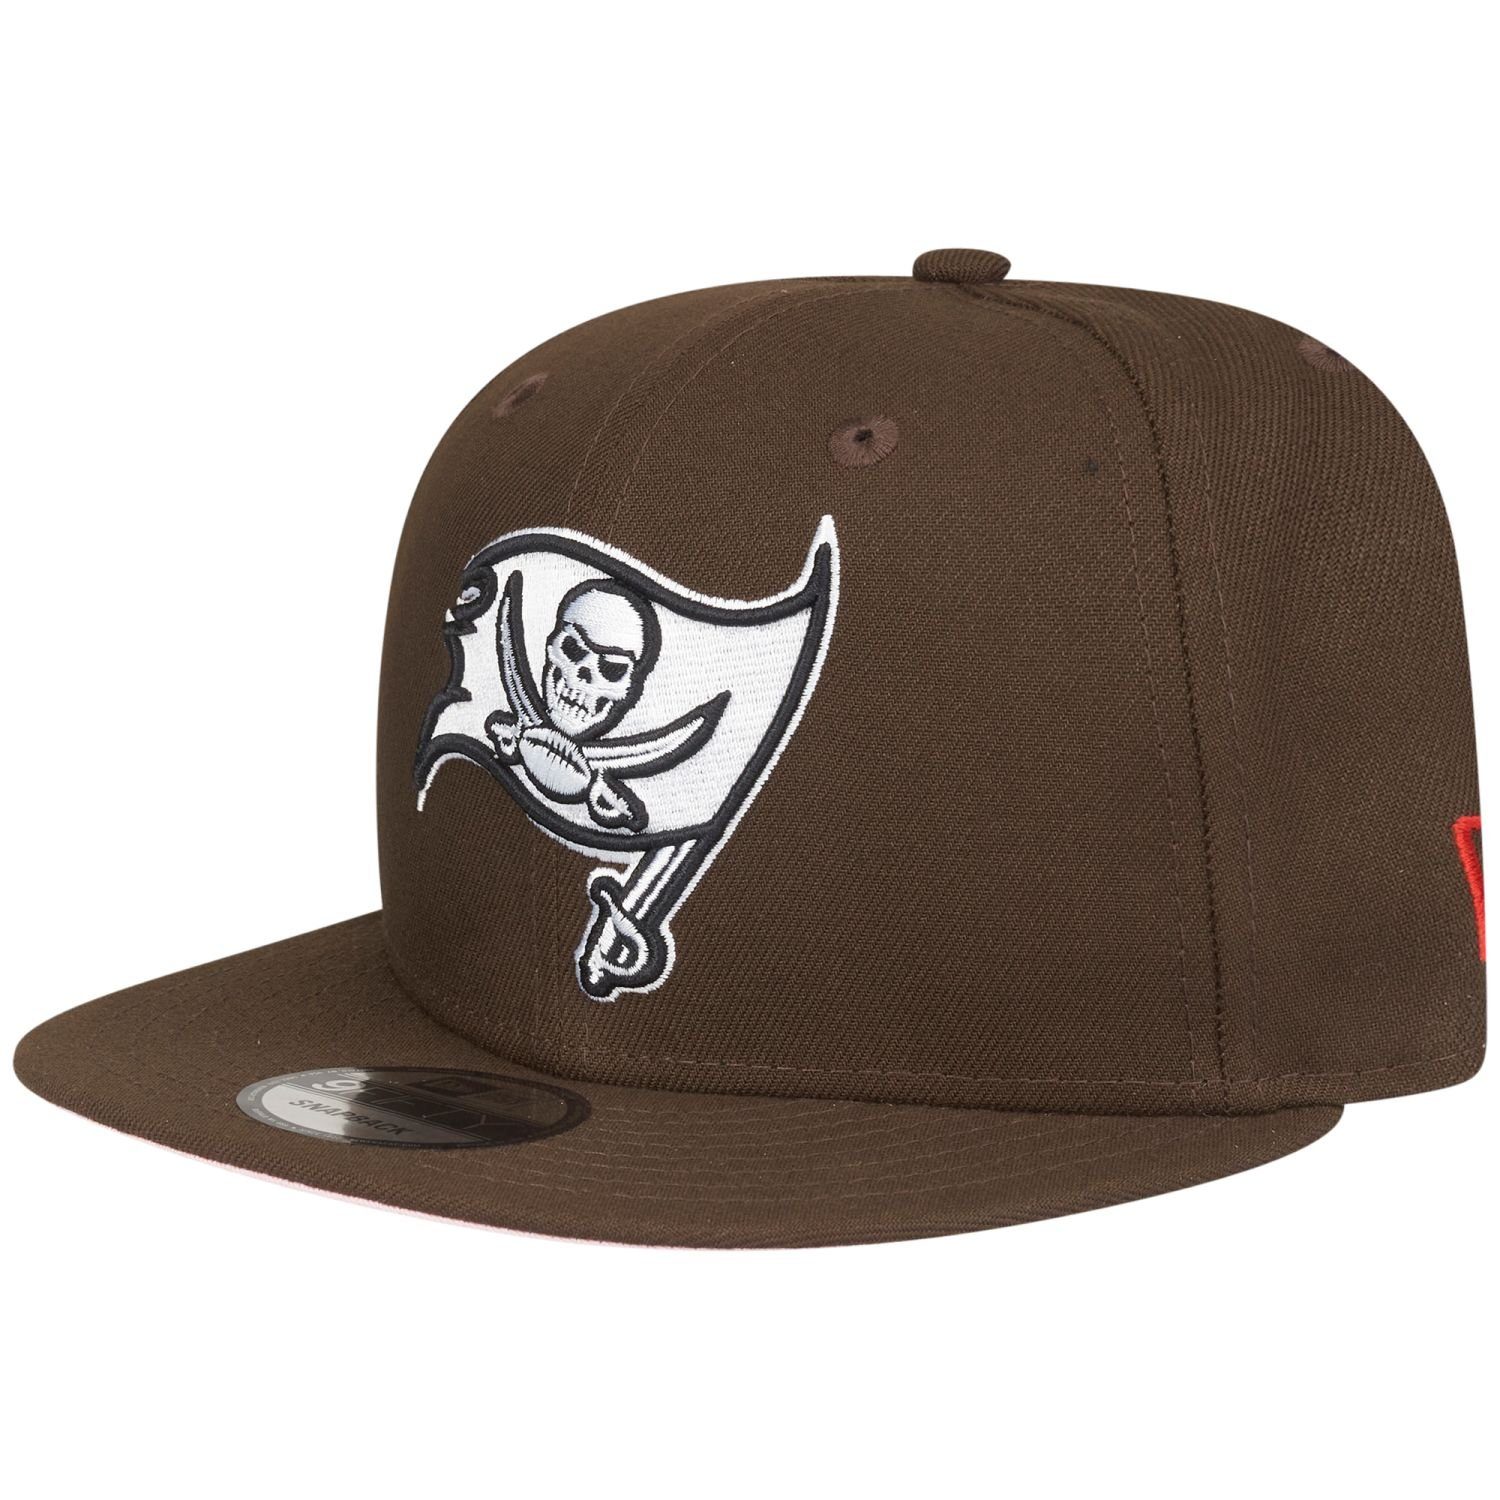 New Era Snapback Cap Tampa Bay SIDEPATCH Buccaneers 9Fifty